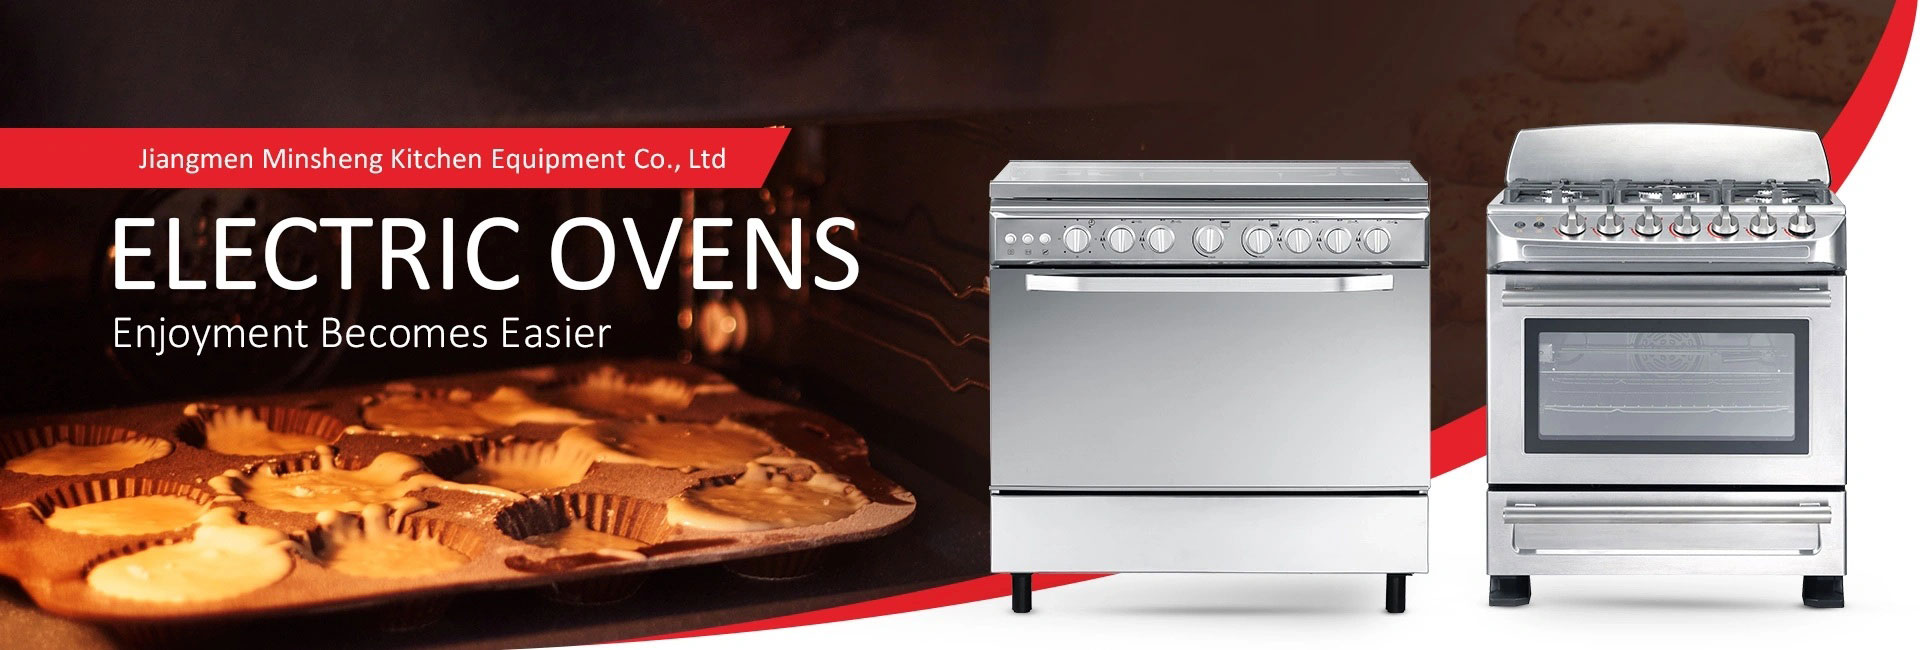 electric ovens